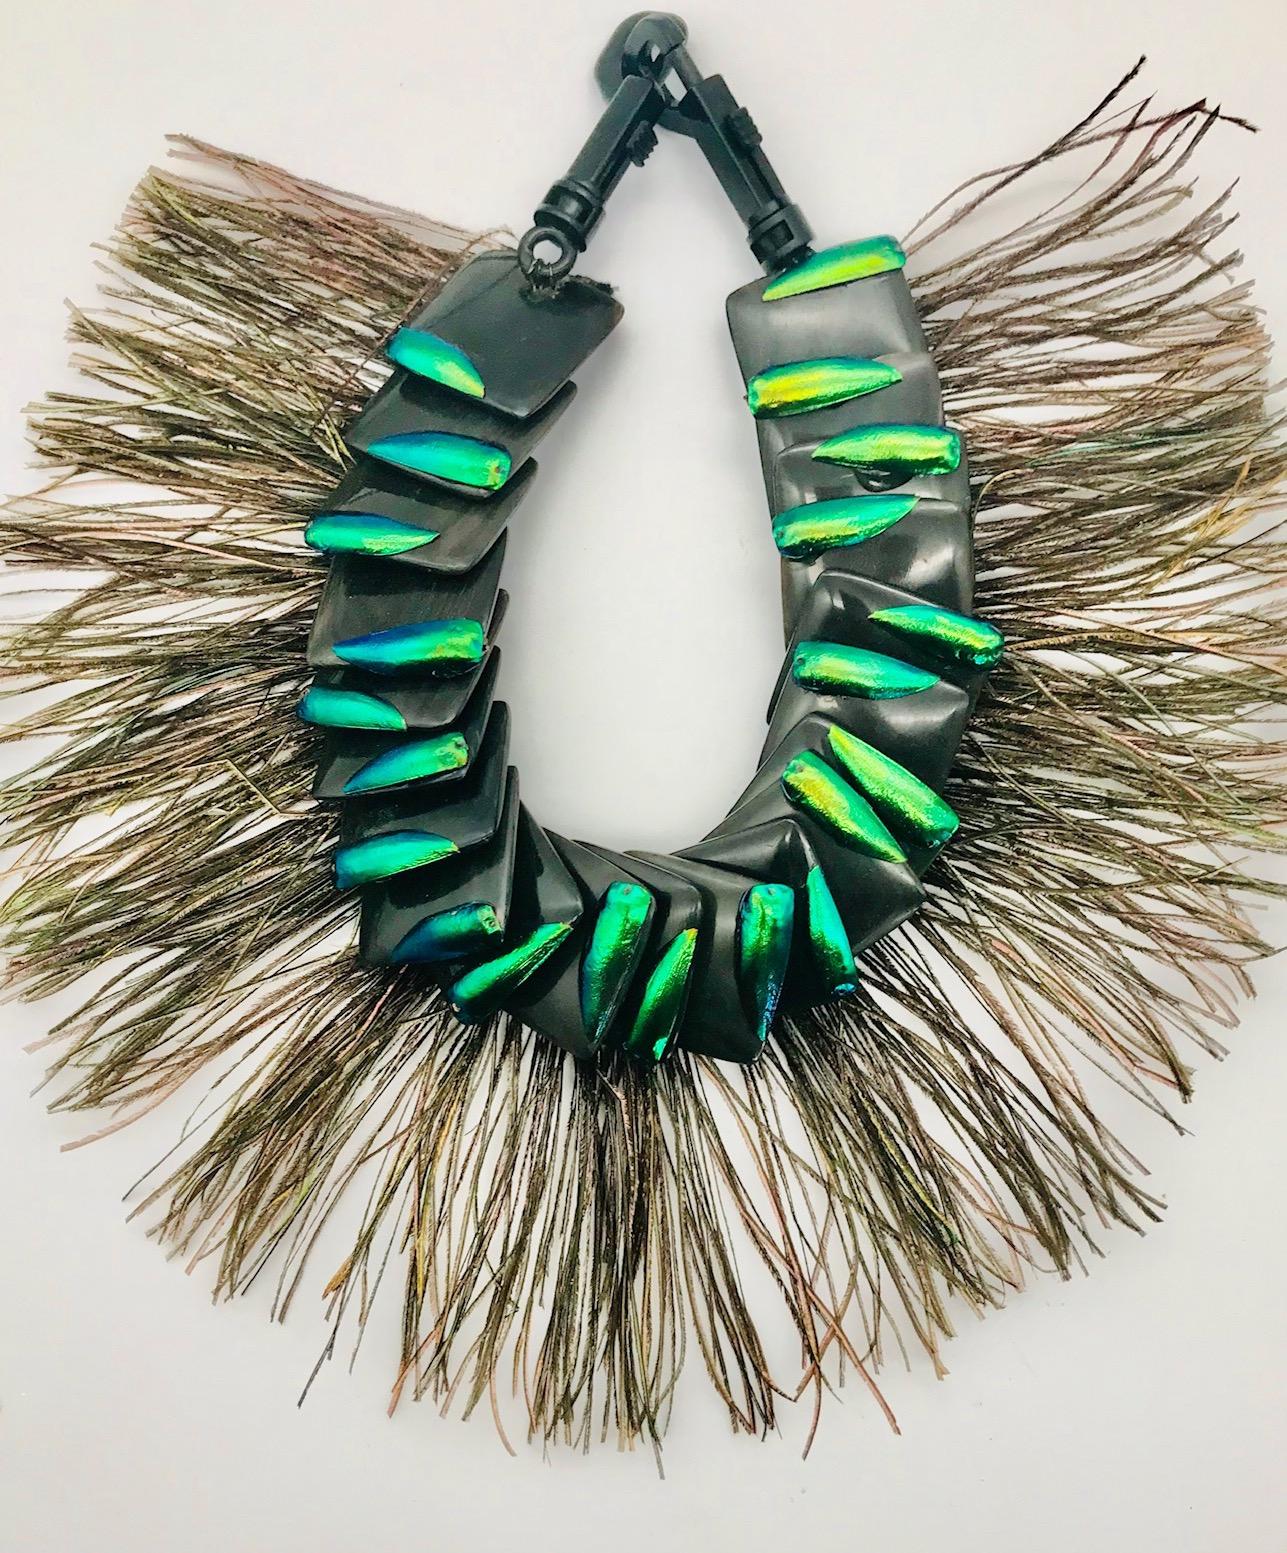 Theatrical ,Statement necklace comprising Elytra Wings on black Resin Squares and Peacock Feathers. This necklace was designed for a theatre in WDC.  Later on it was worn at the Fashion Show in Galle, Sri Lanka, during a Literary and Art Fest, where